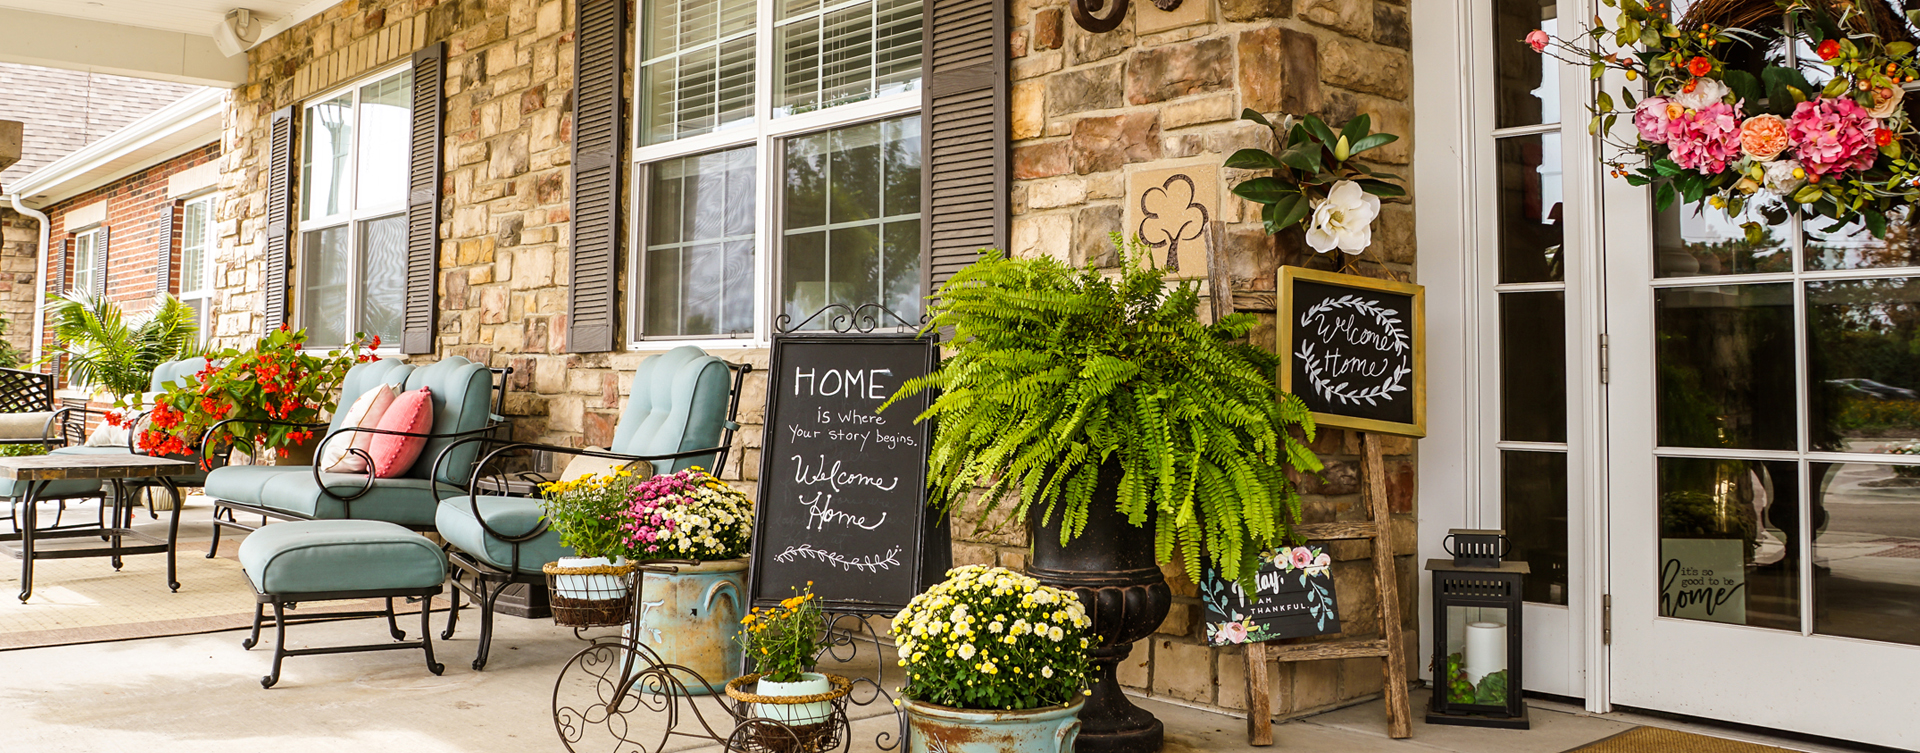 Enjoy conversations with friends on the porch at Bickford of Gurnee